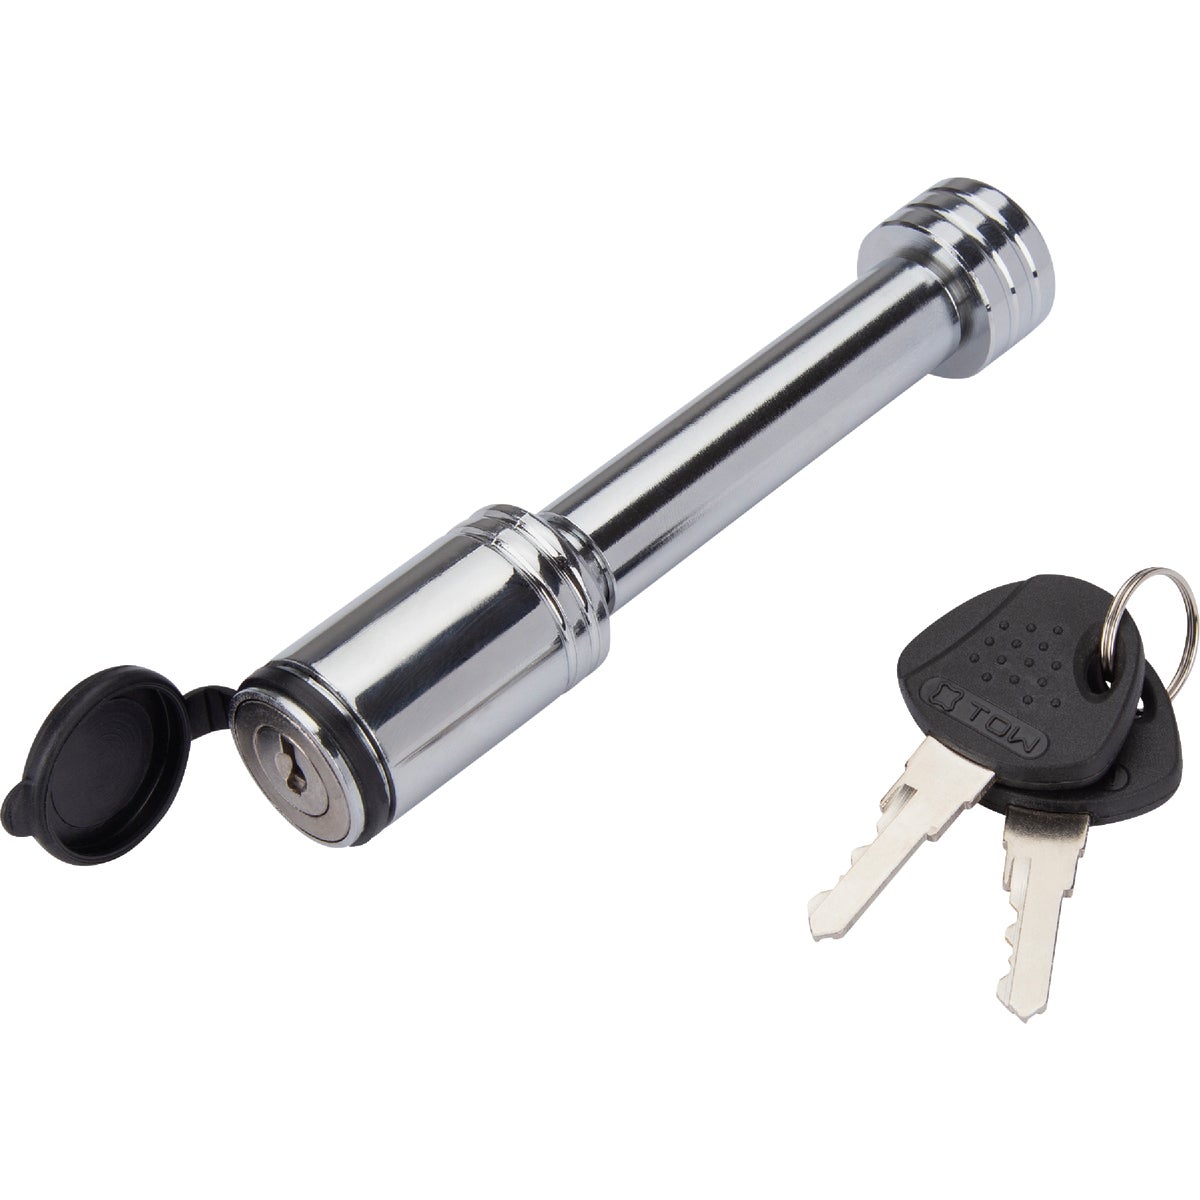 Item 582248, The TowSmart Steel Barrel Style Trailer Hitch Lock protects your boats, 